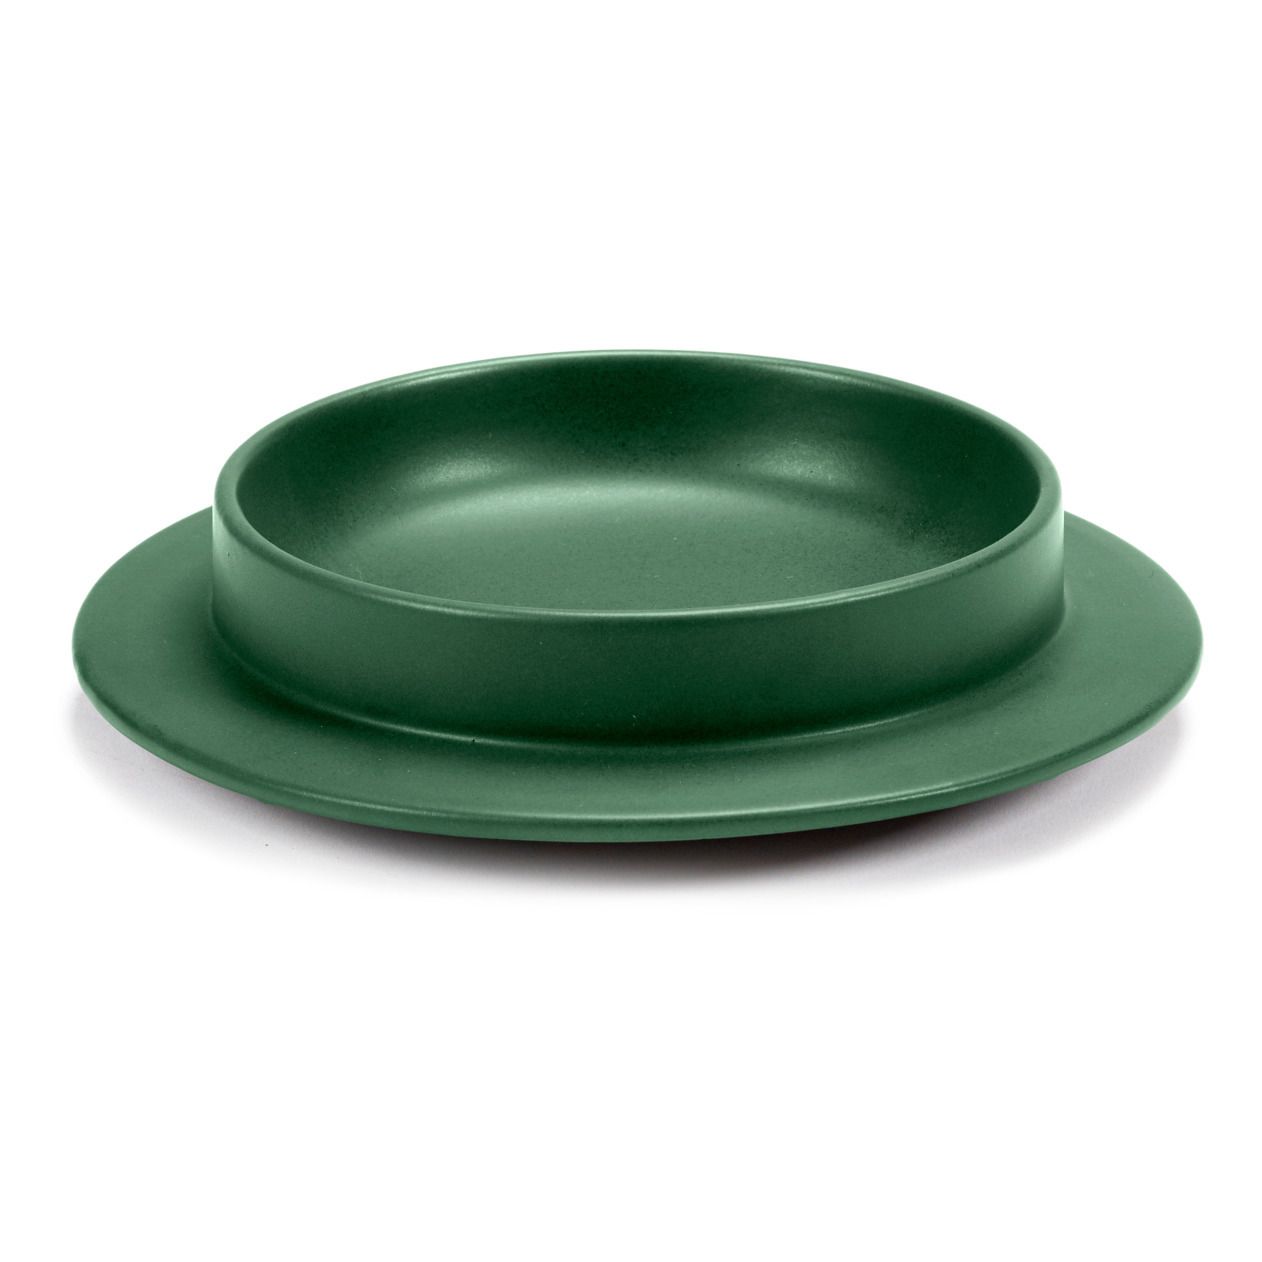 Valerie Objects - Bol Dishes to dishes - Vert